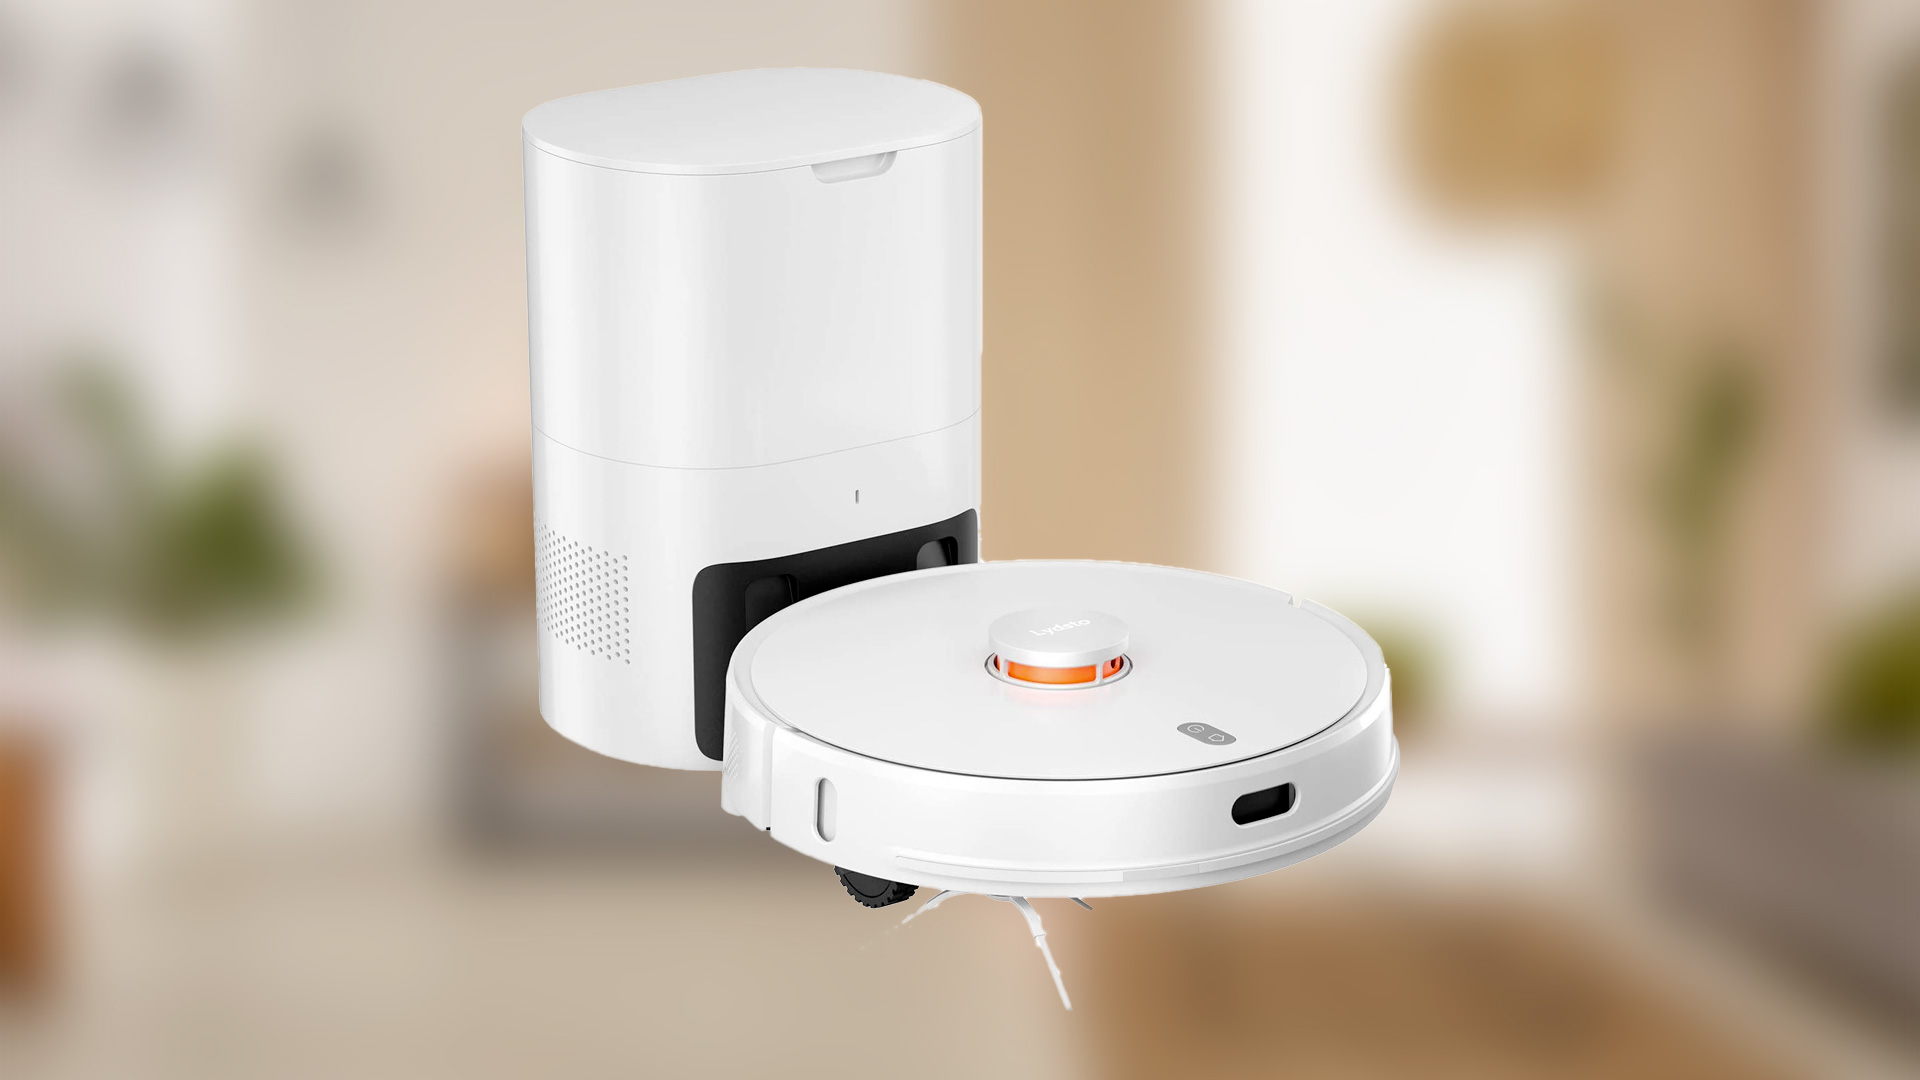 Xiaomi lydsto robot vacuum cleaner. Xiaomi lydsto r1. Робот-пылесос lydsto r1 Pro. Робот-пылесос Xiaomi lydsto. Xiaomi lydsto r1 Robot.